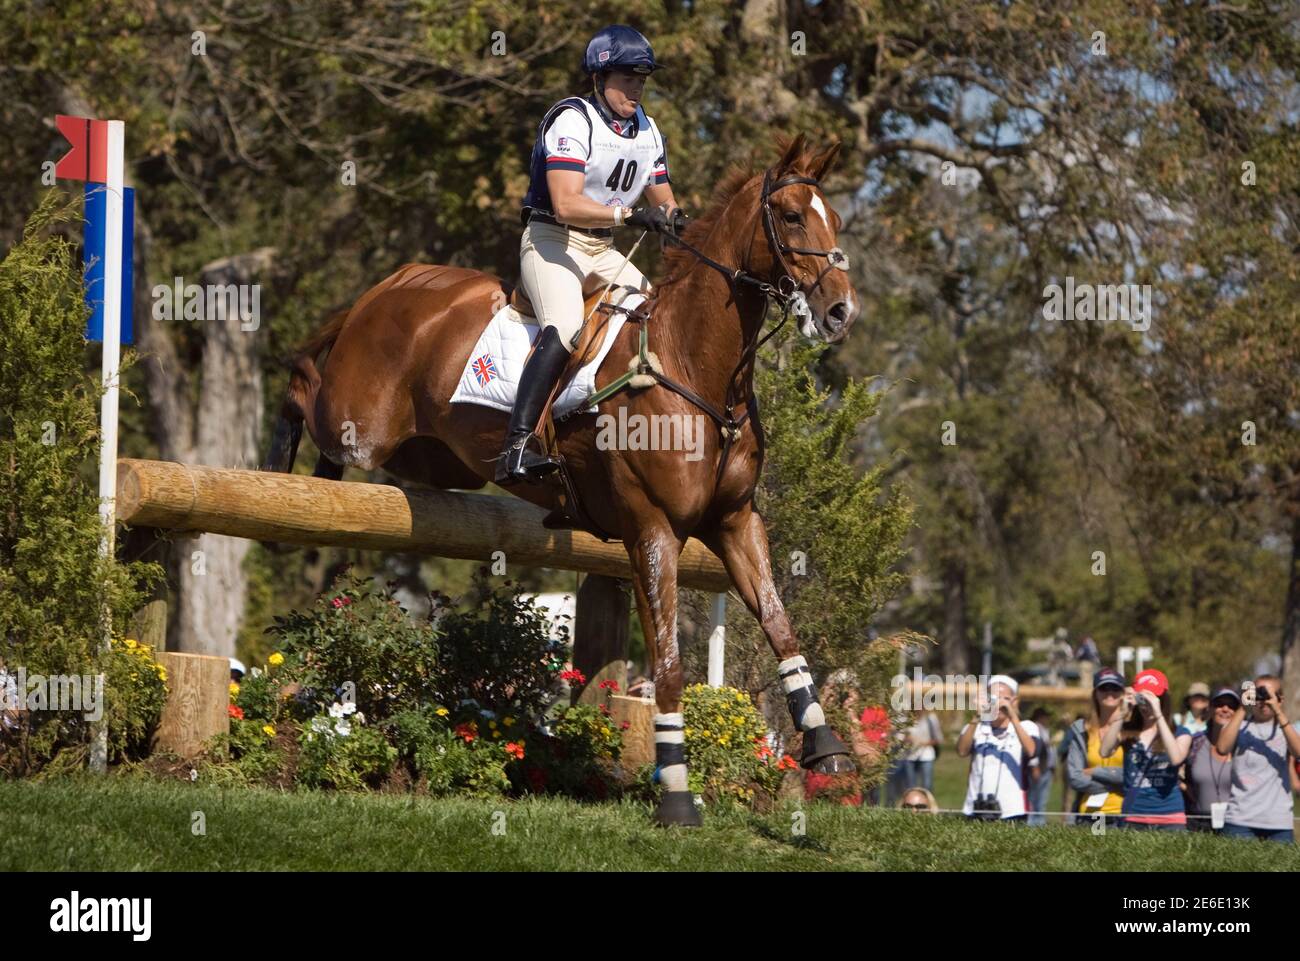 Pippa Funnell of Britain riding Redesigned competes in the cross country phase of the Eventing World Championship at the World Equestrian Games in Lexington, Kentucky, October 2, 2010. REUTERS/Caren Firouz  (UNITED STATES - Tags: ANIMALS SPORT EQUESTRIANISM) Stock Photo